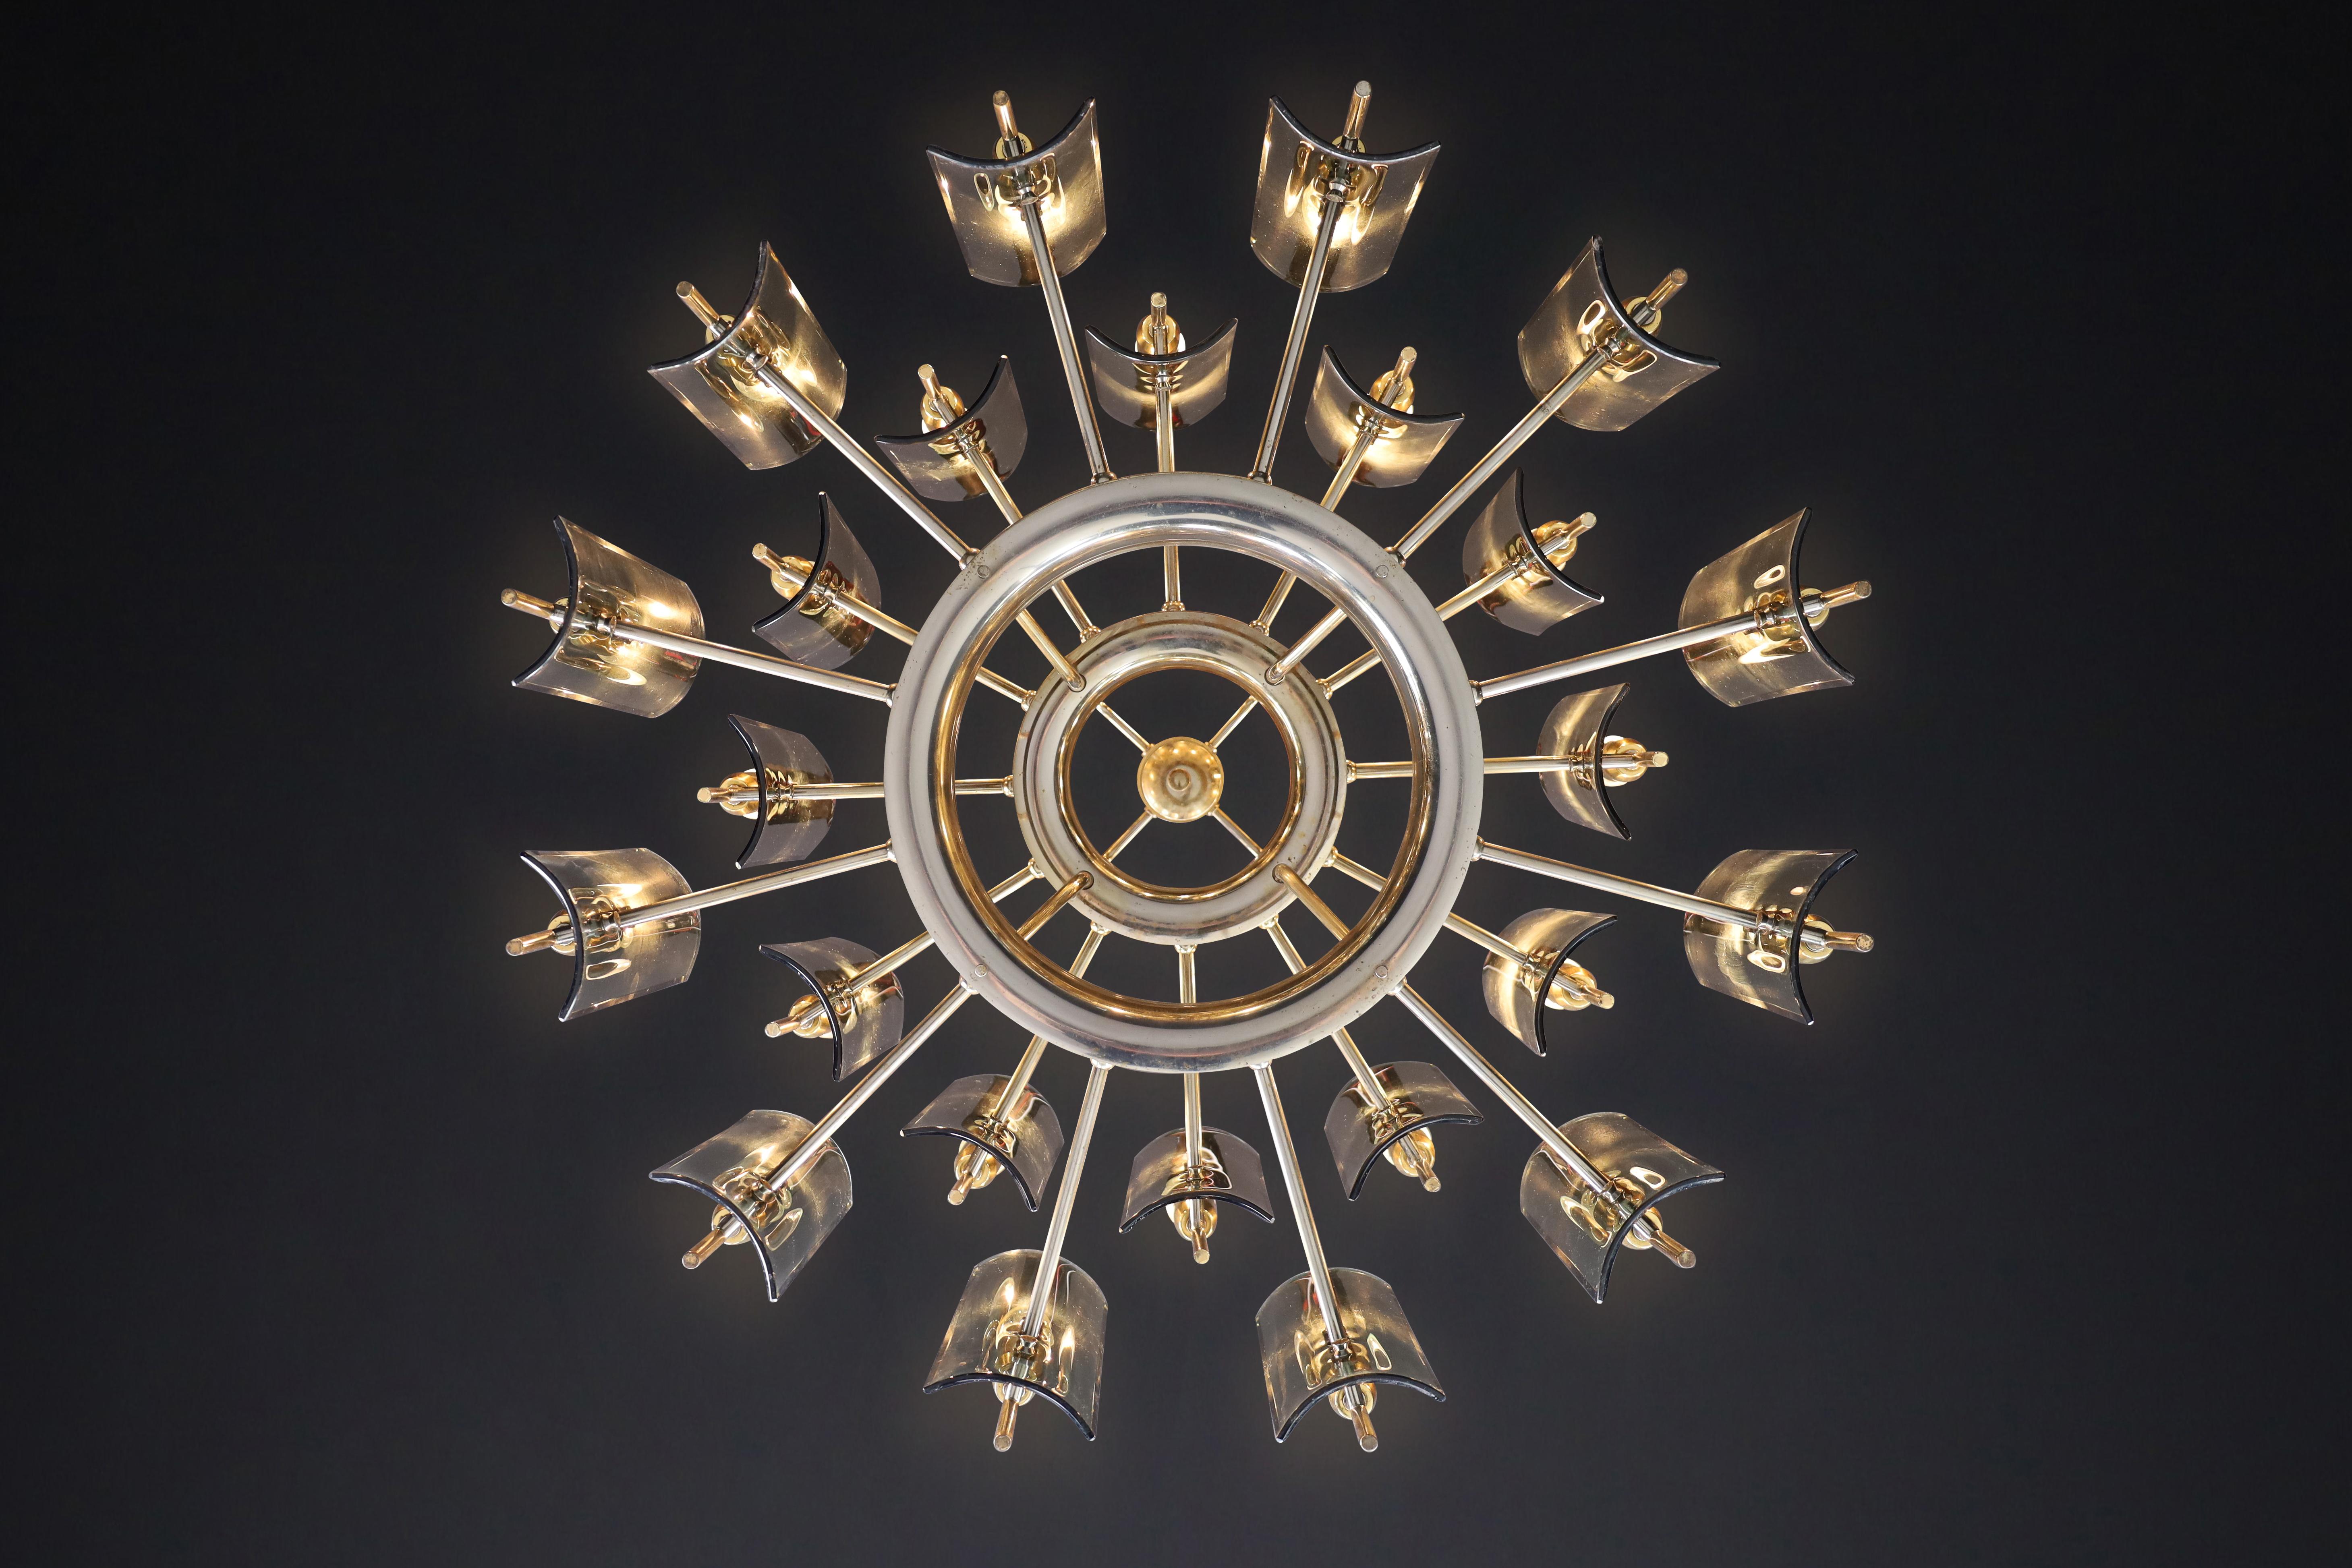 Set of Six Gino Paroldo Grande Chandeliers in Brass, Italy 1950 For Sale 4